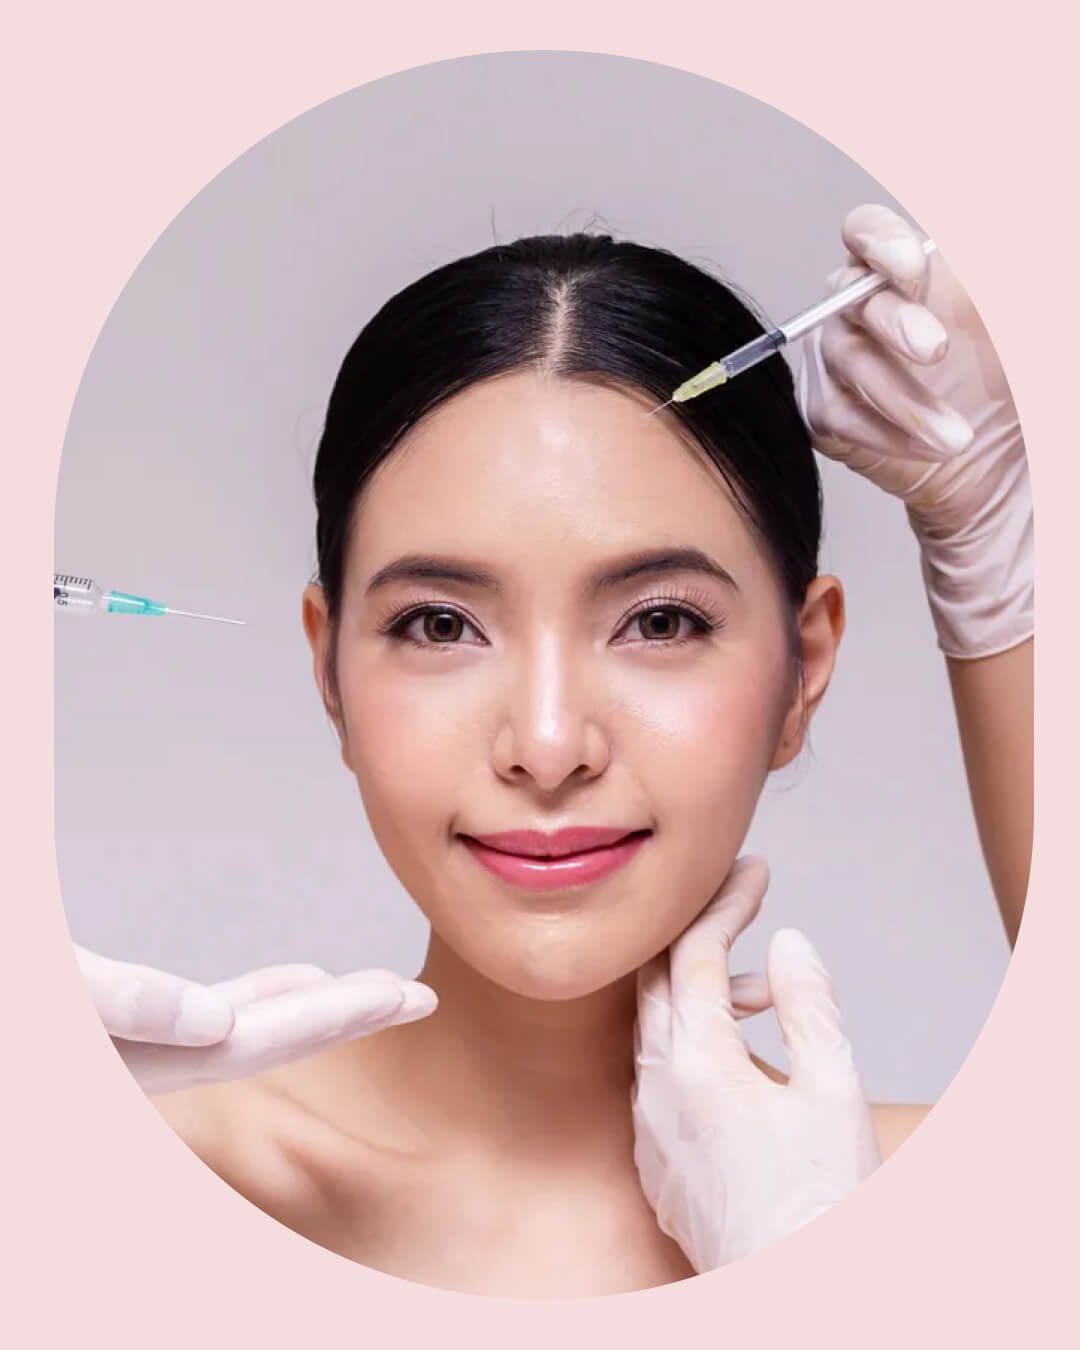 Injectables 101: everything you need to know